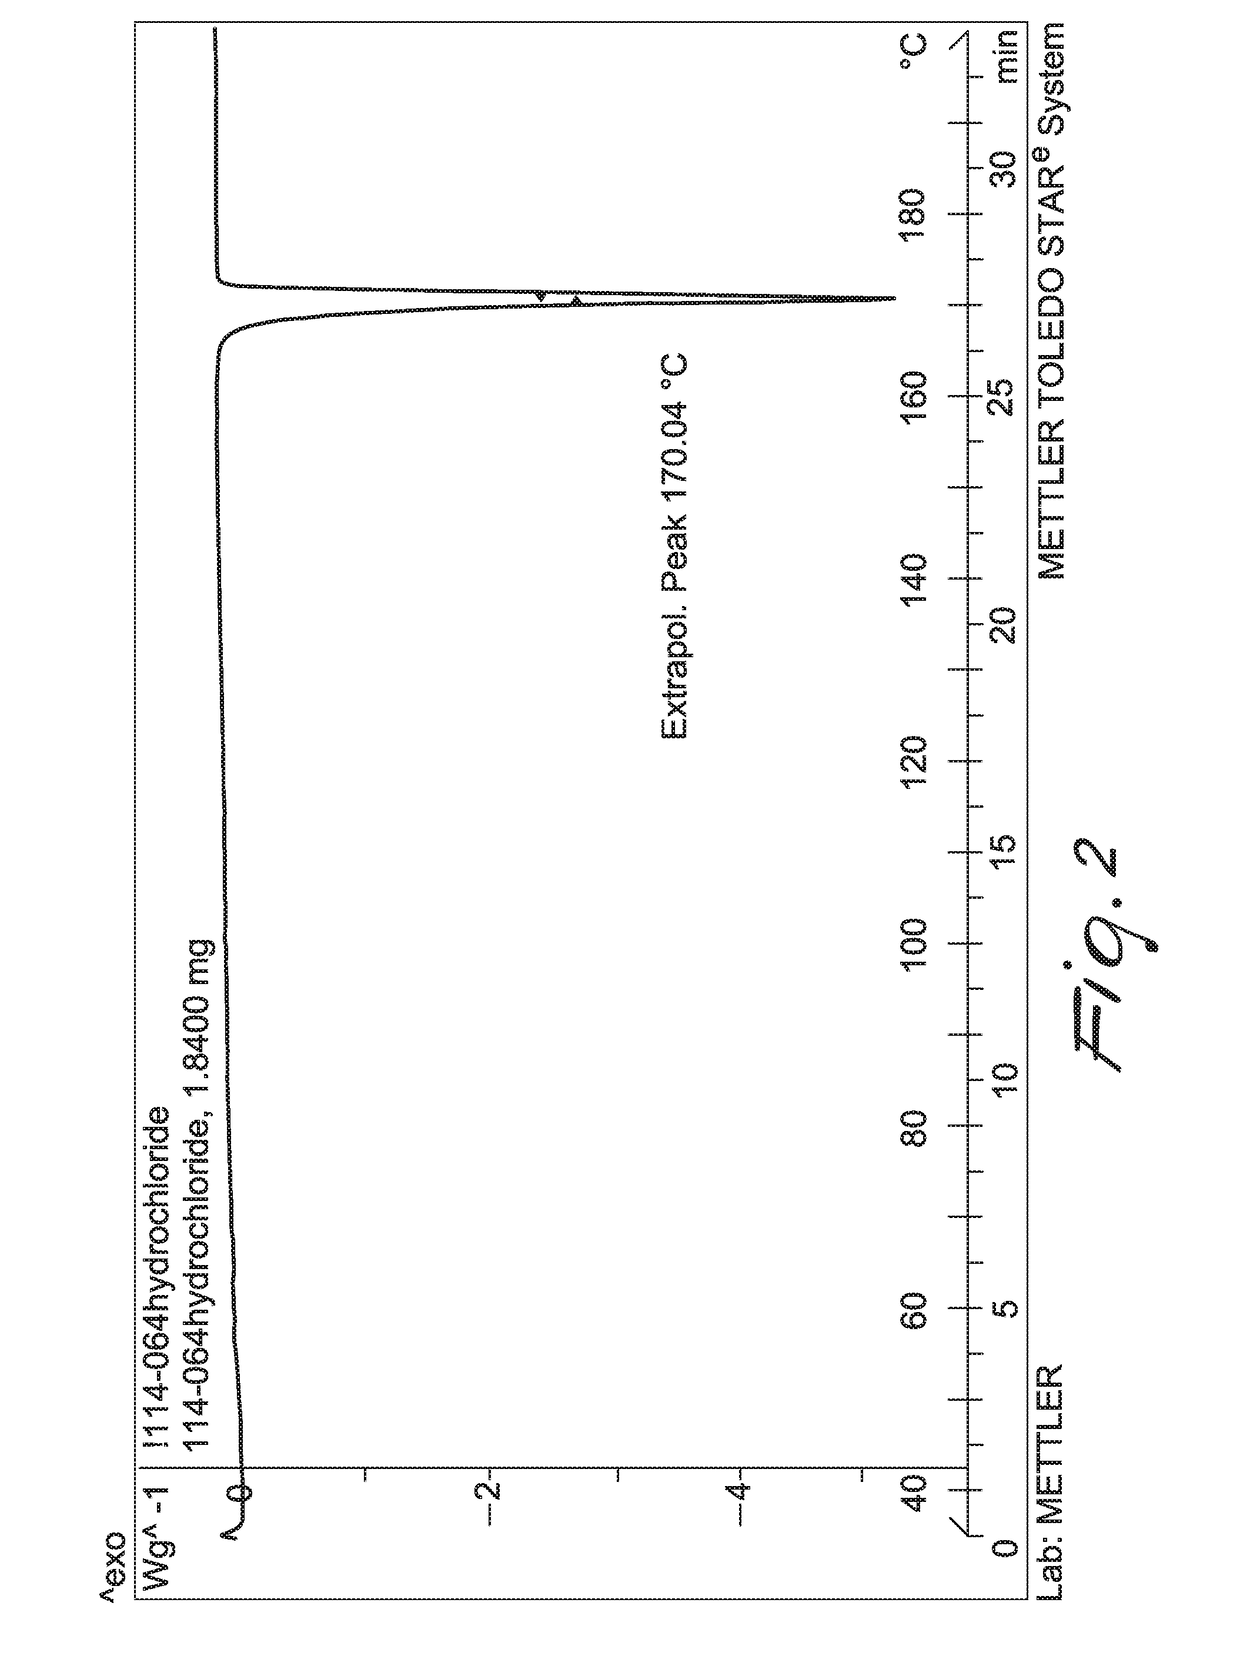 New method for synthesis of fenfluramine, and new compositions comprising it